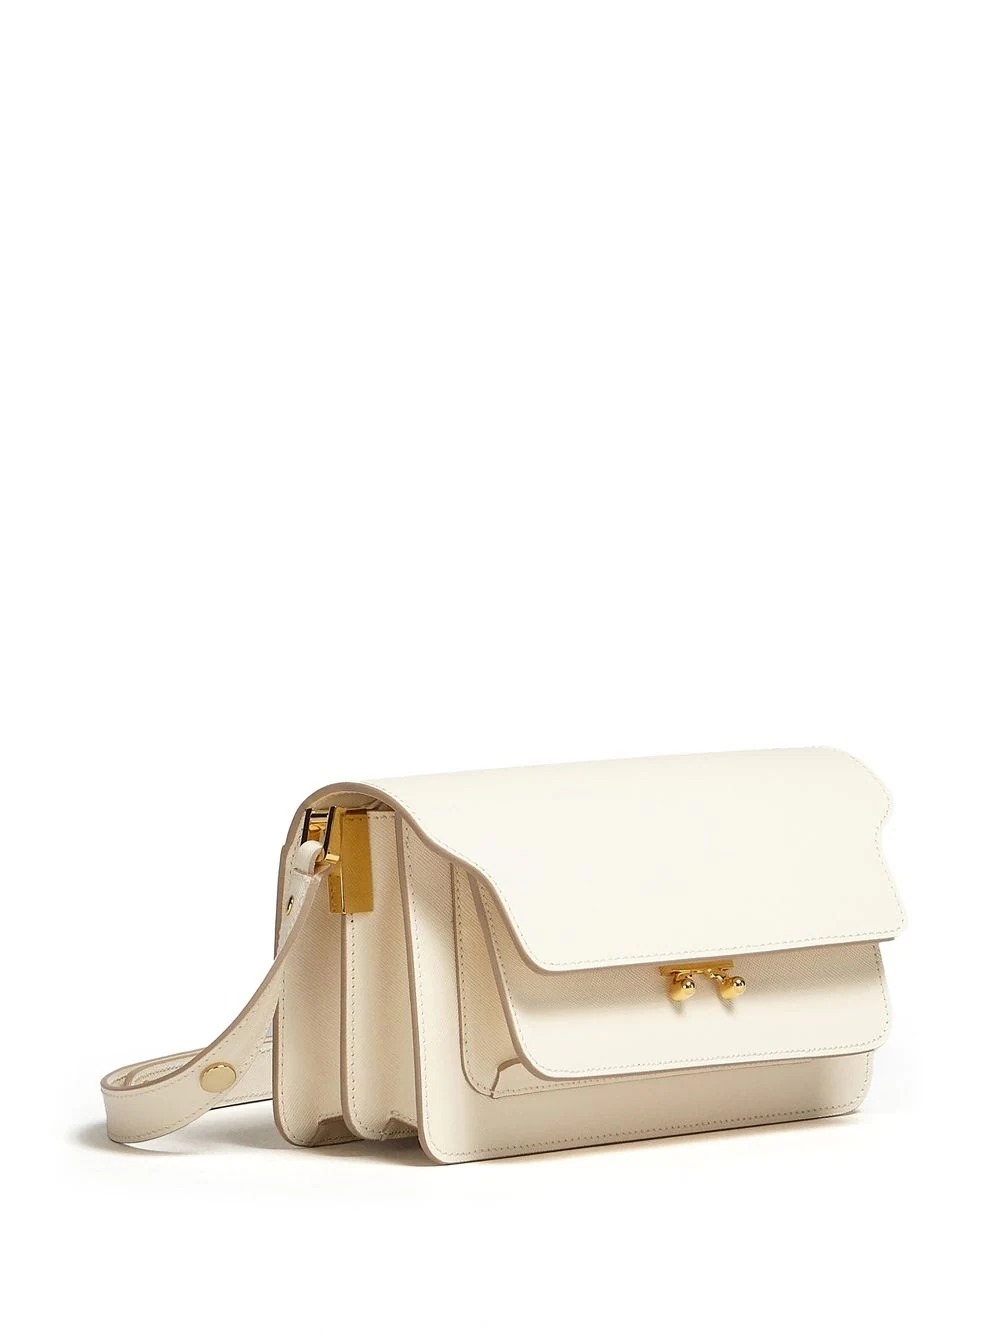 Marni: Off-White East West Trunk Bag